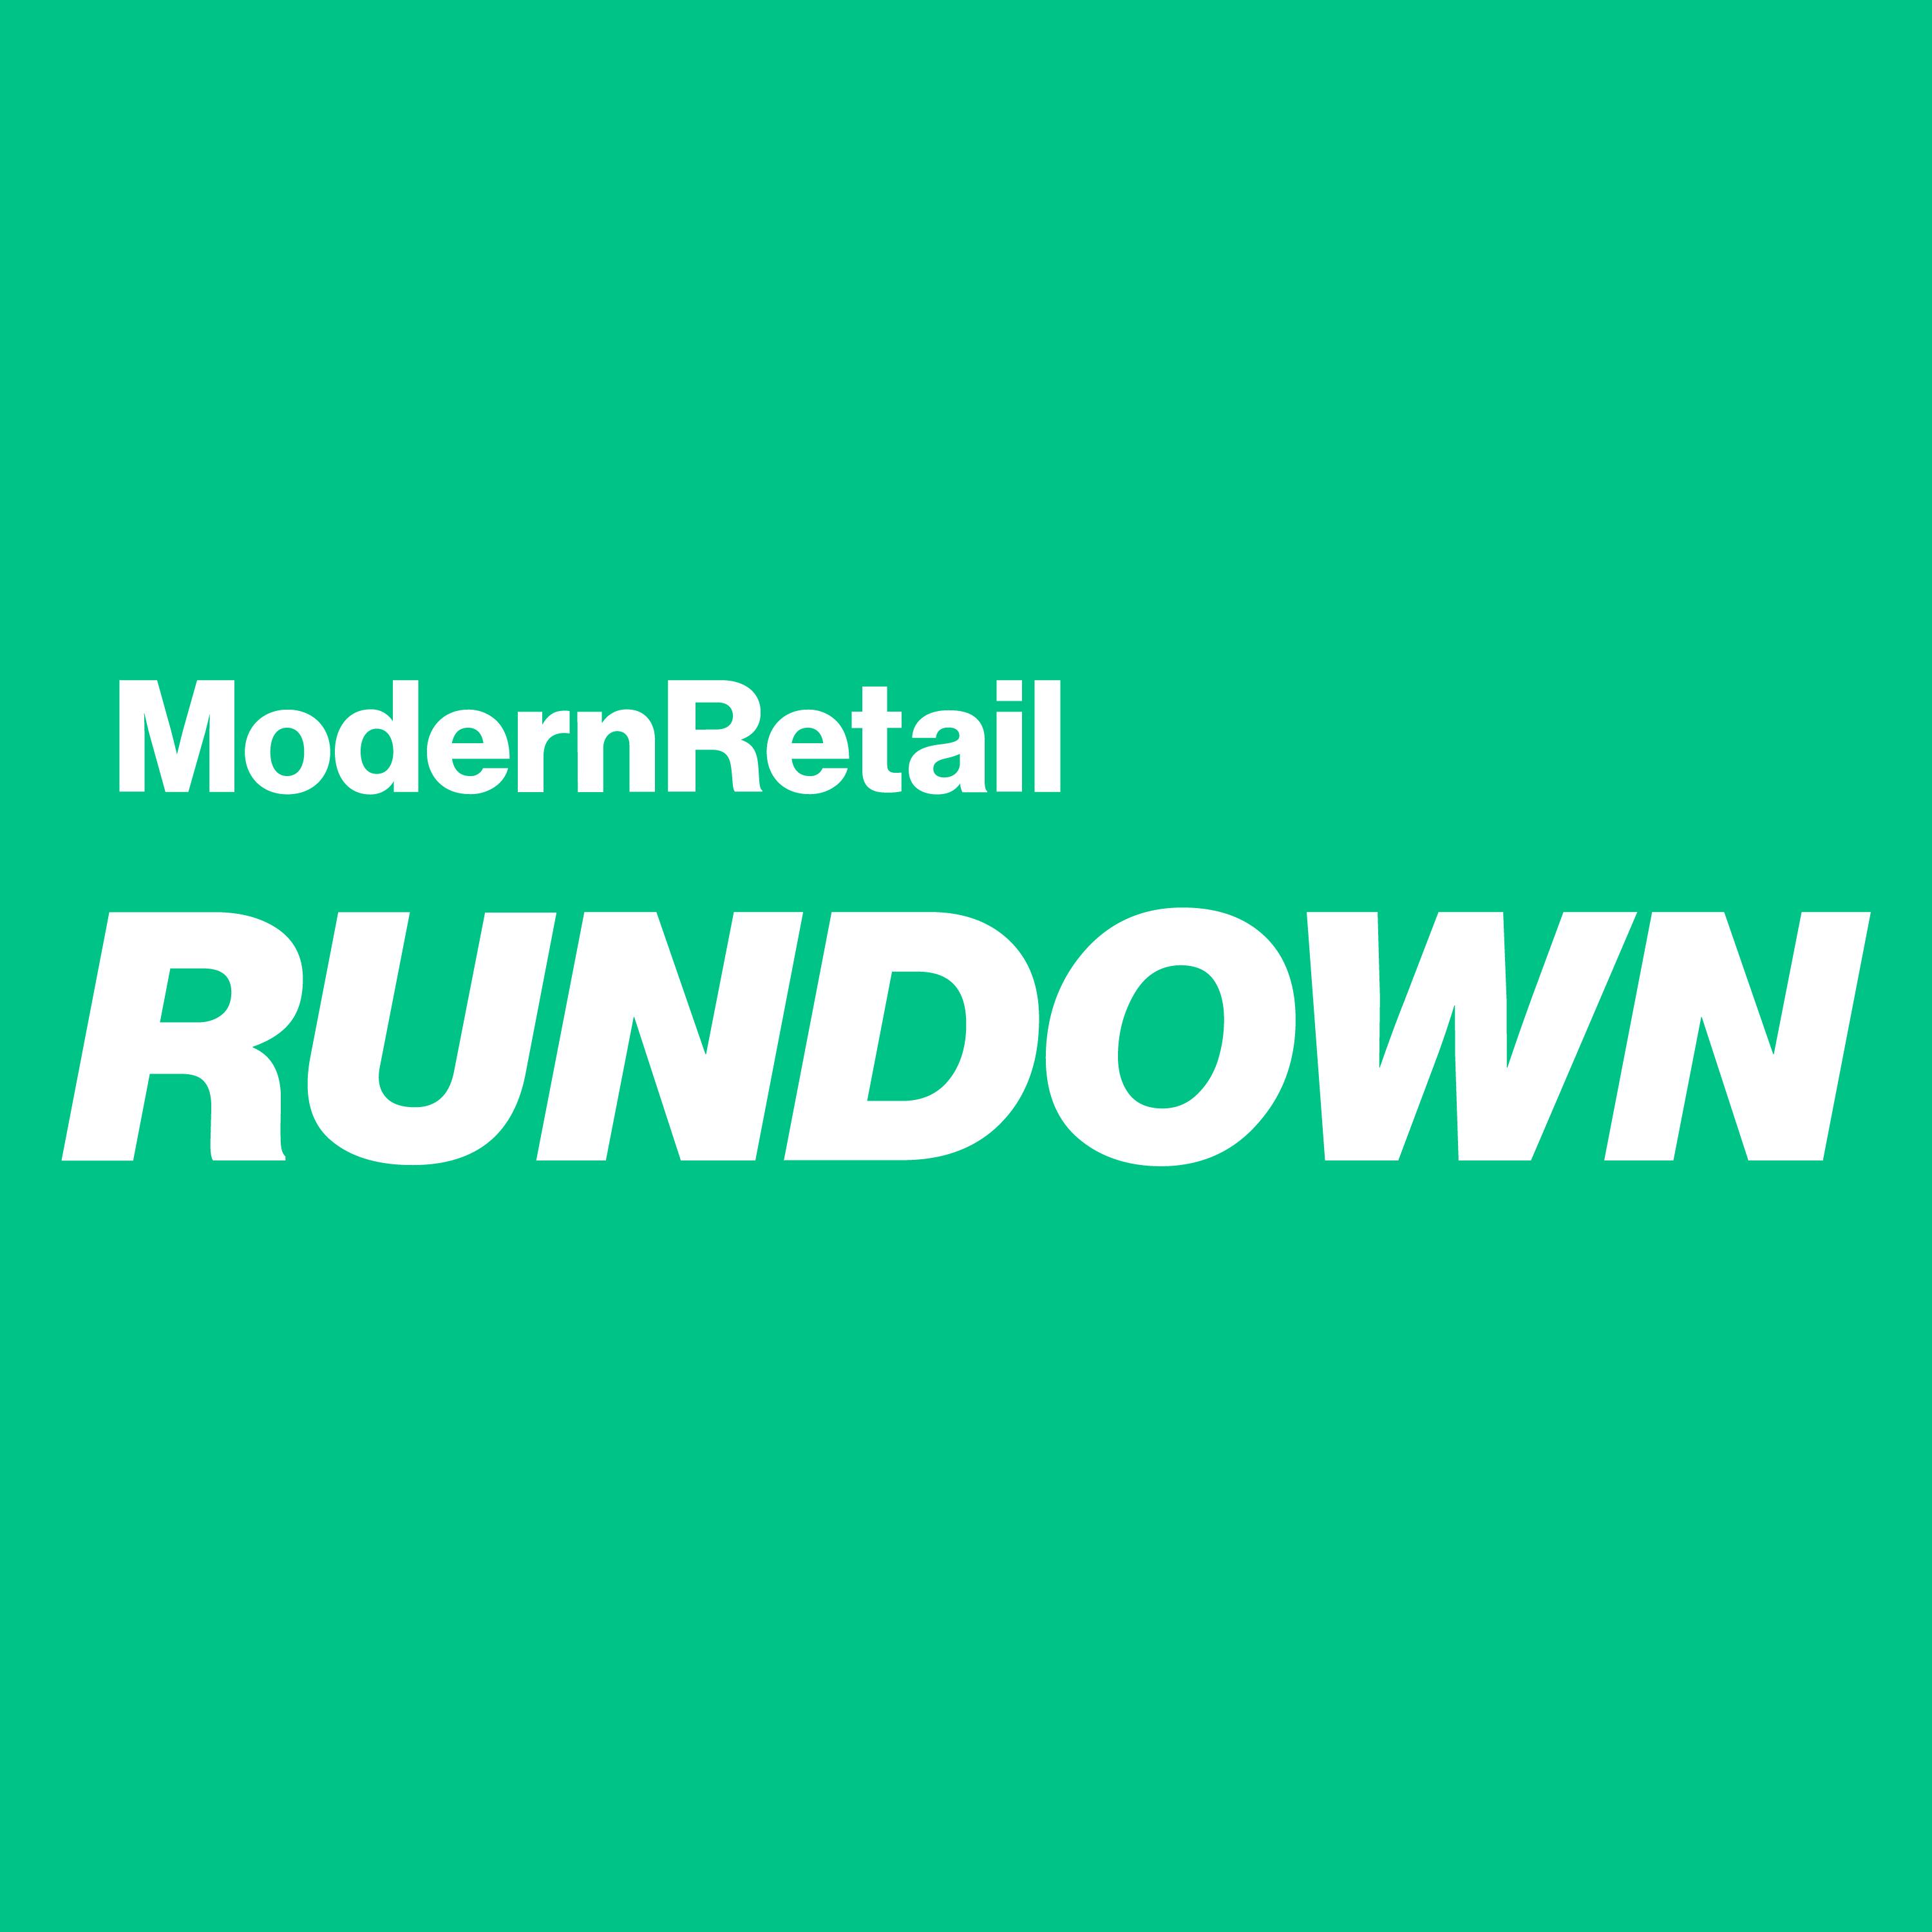 Rundown: Reddit's IPO, Beyond Meat gets healthier & Macy's proxy fight continues